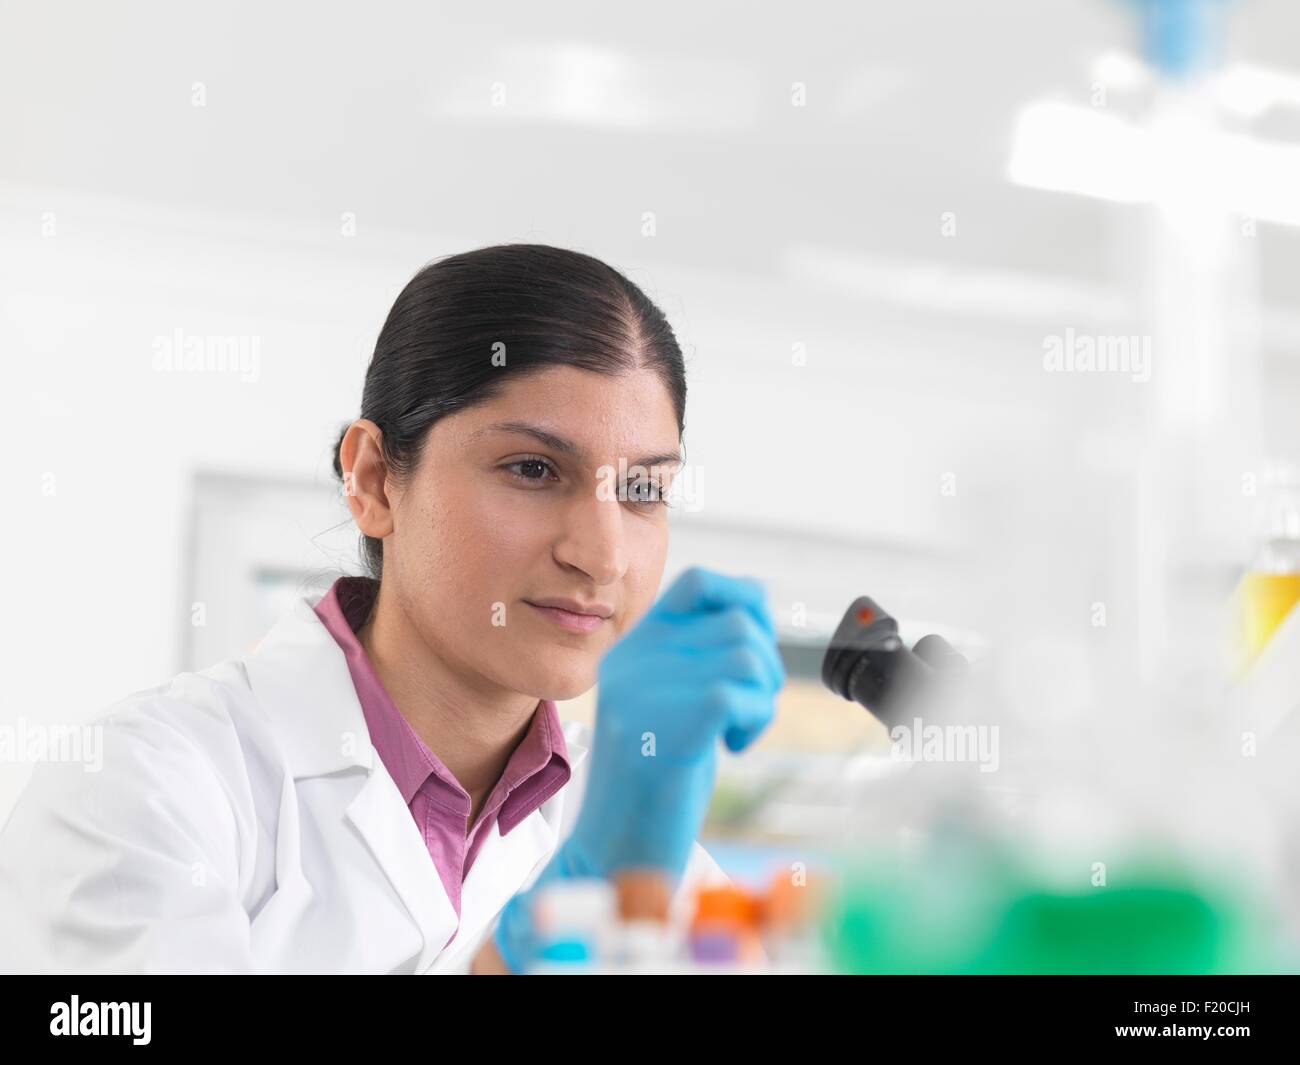 Young woman scientist viewing blood slide during clinical testing of medical samples in a laboratory Stock Photo